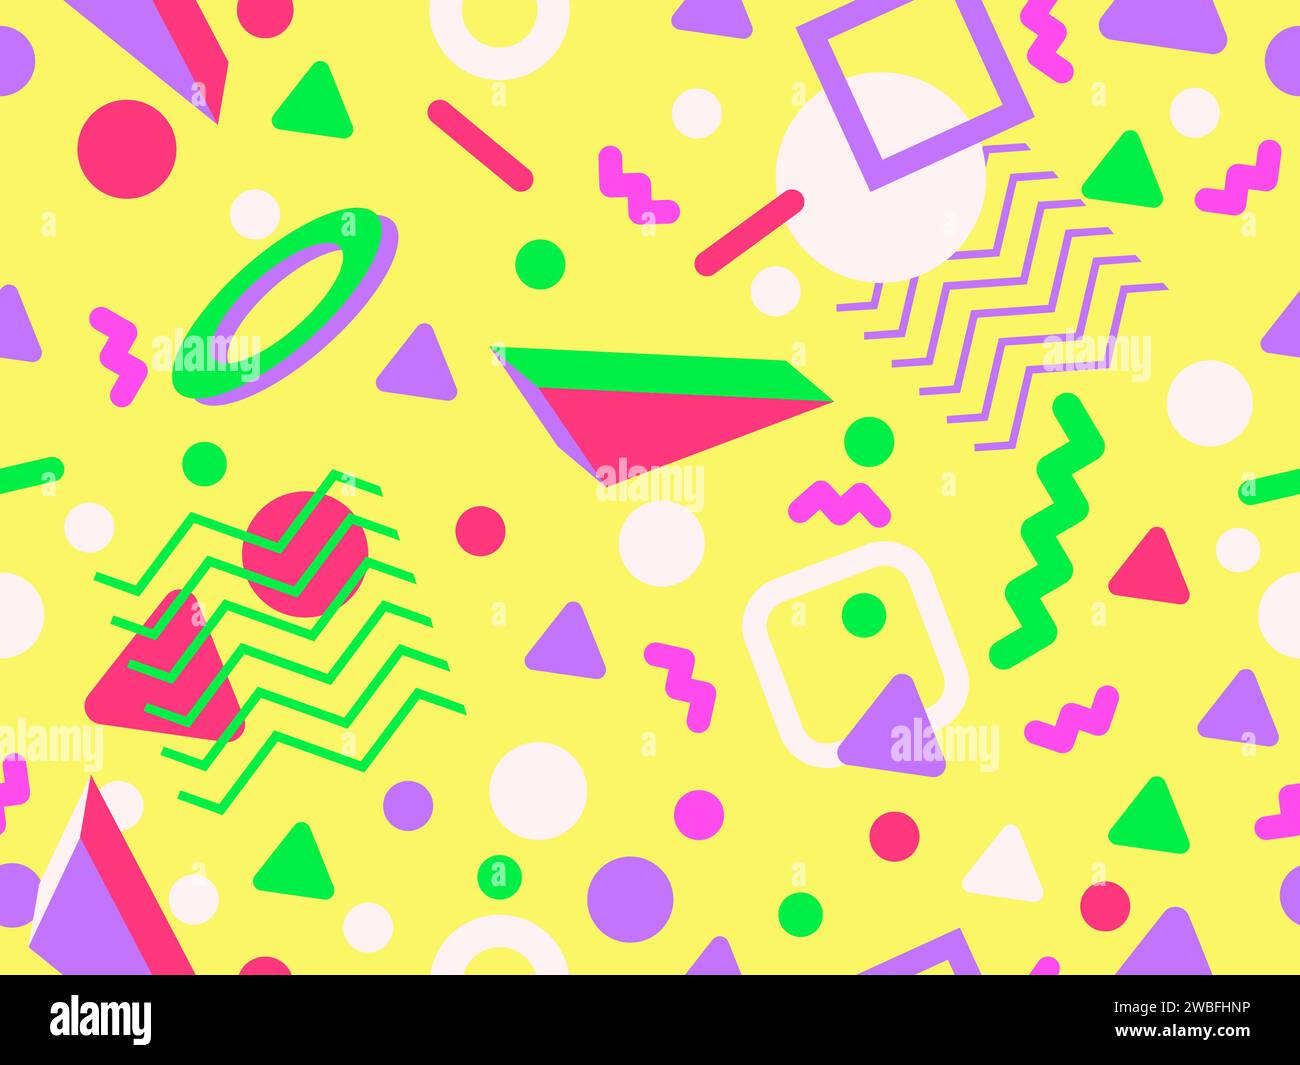 3D geometric seamless pattern in 80s style. 3d isometric triangles, zigzags and circles. Geometric memphis style. Design for promotional products, wra Stock Vector